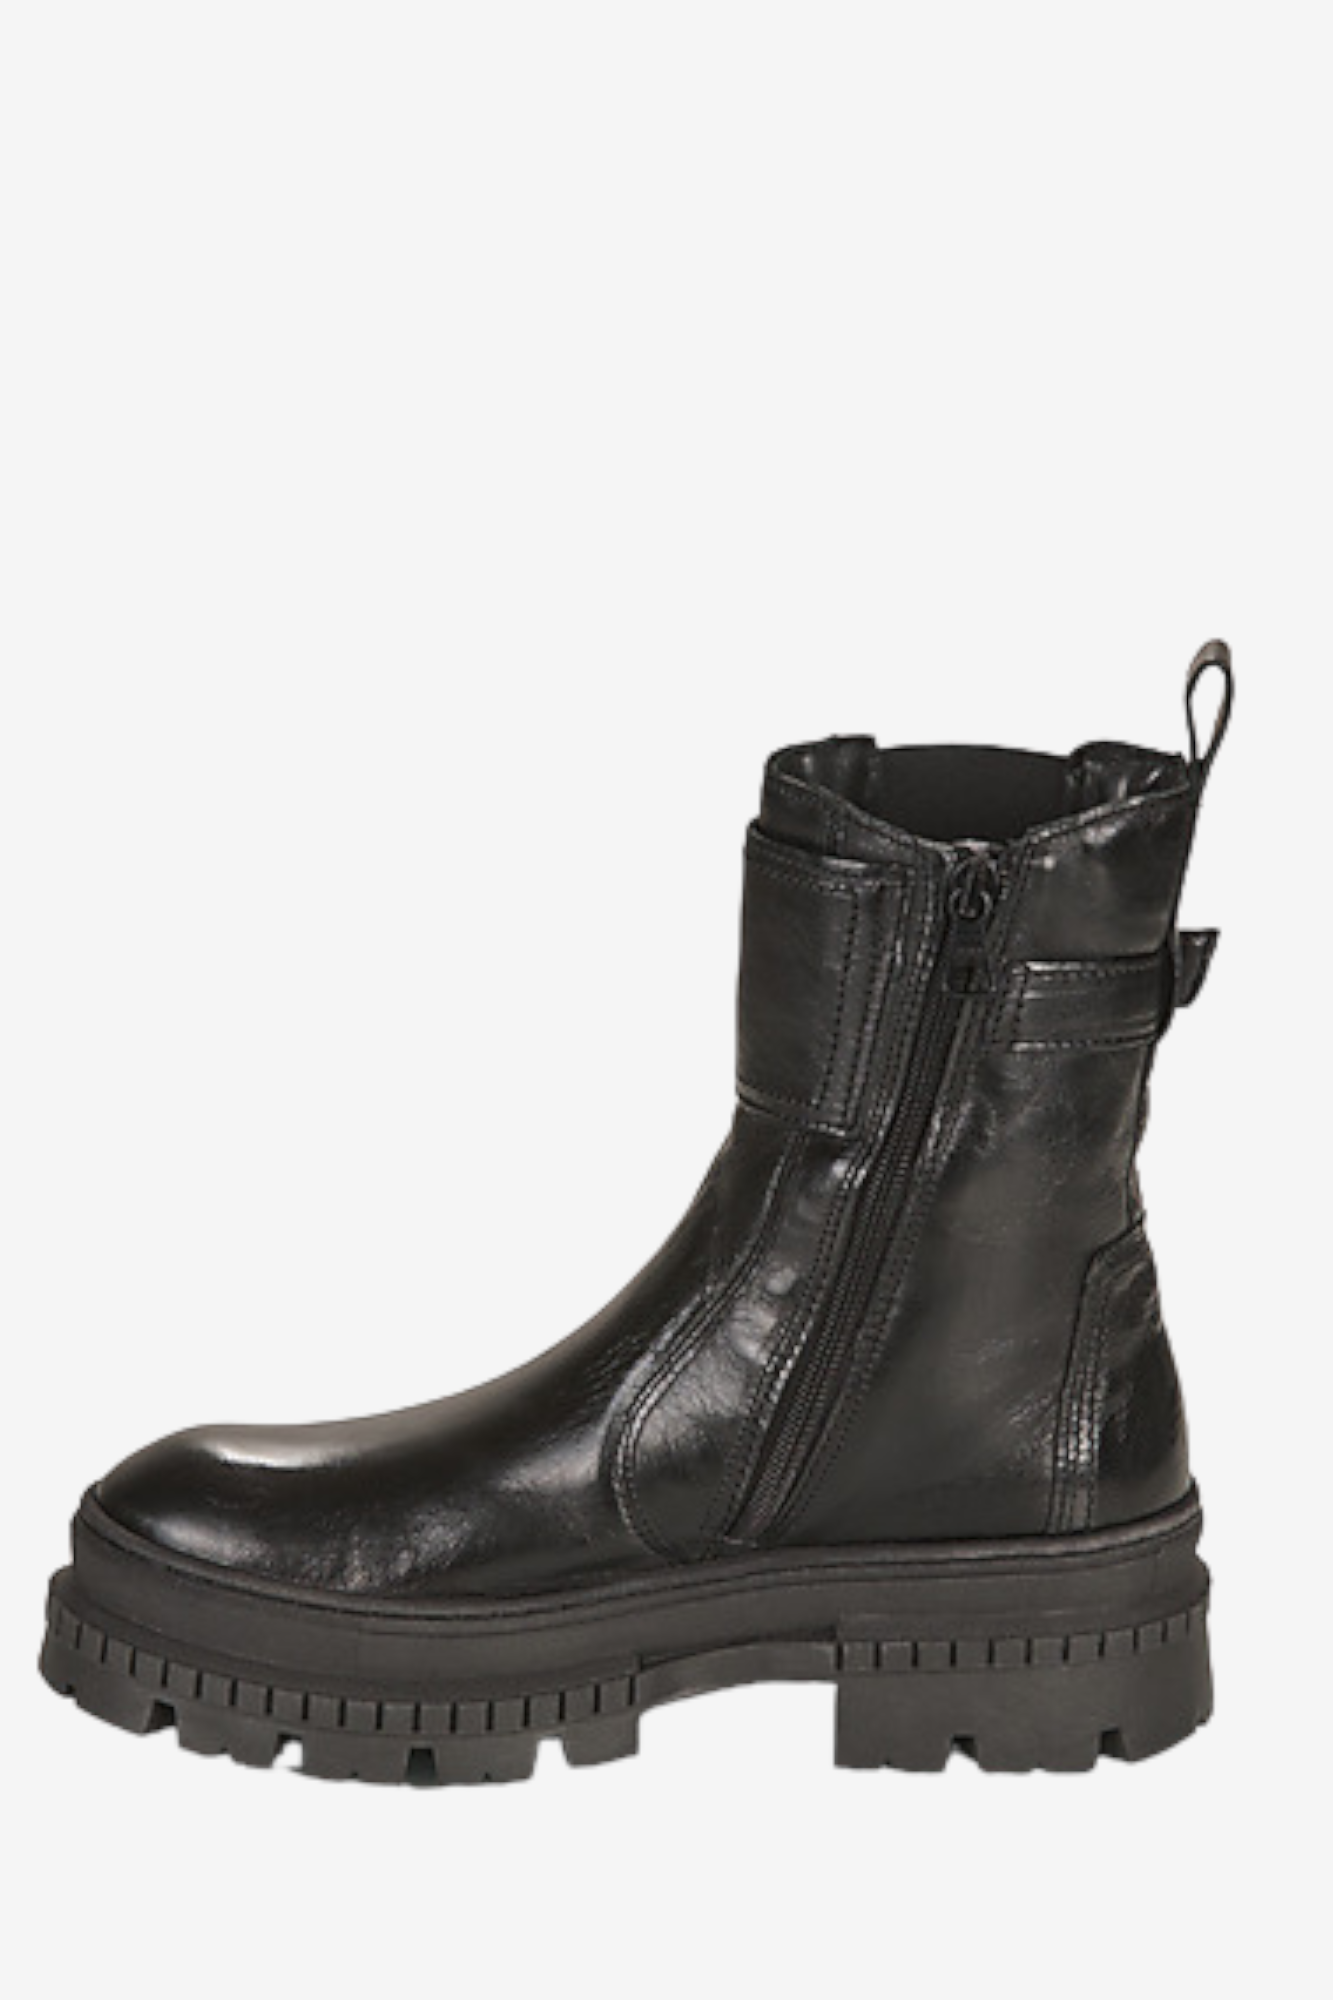 MJUS LUX 68205 BLACK LEATHER BOOT